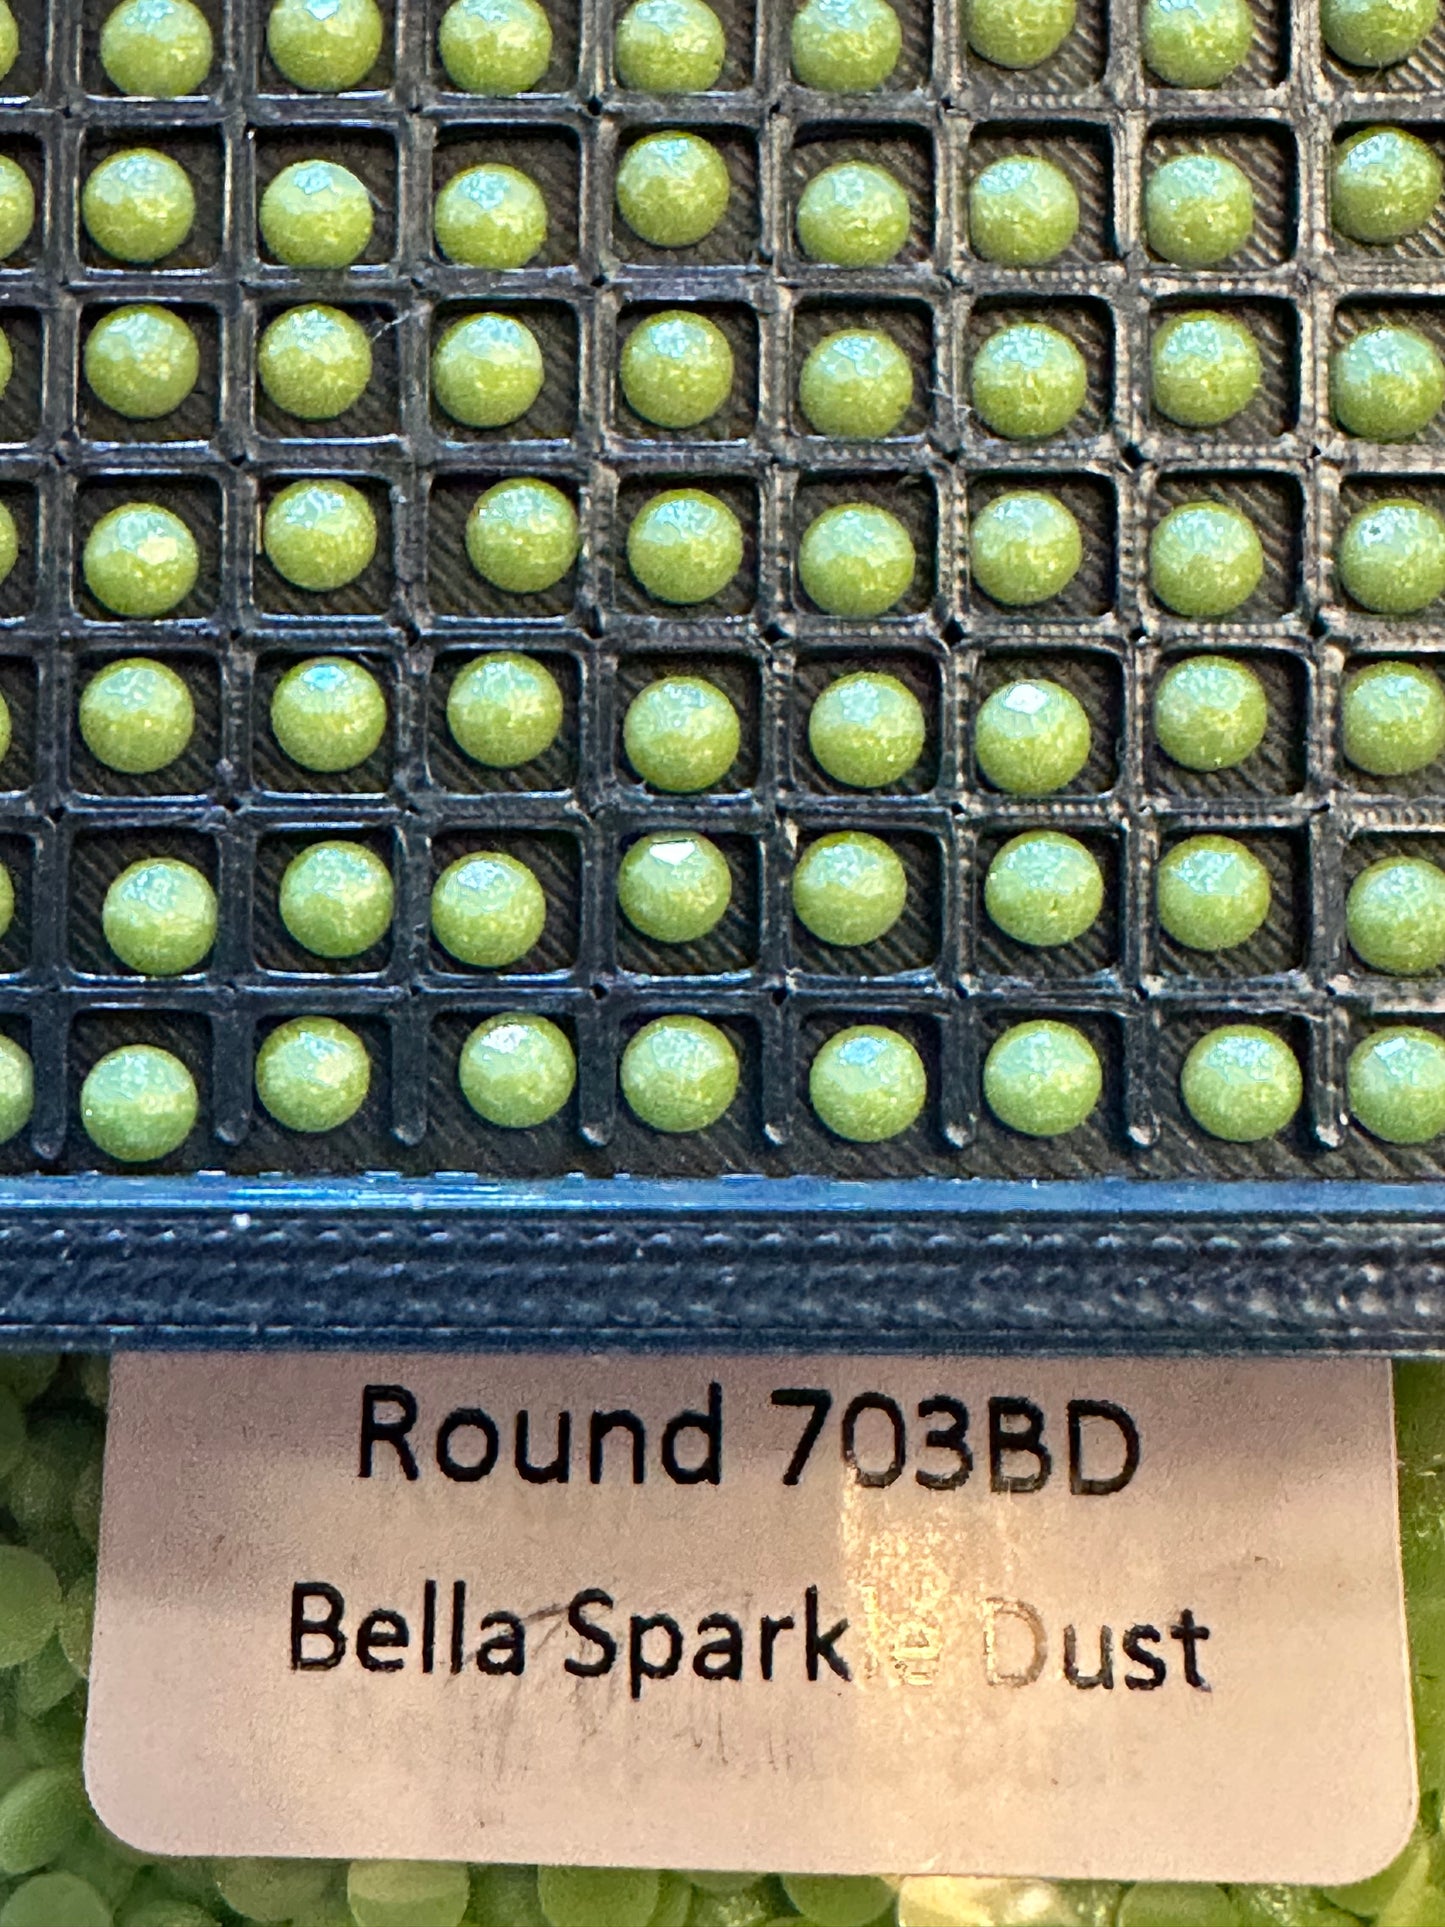 NEW Round Bella Sparkle Dust Diamond Painting Drills in 10 gram bags